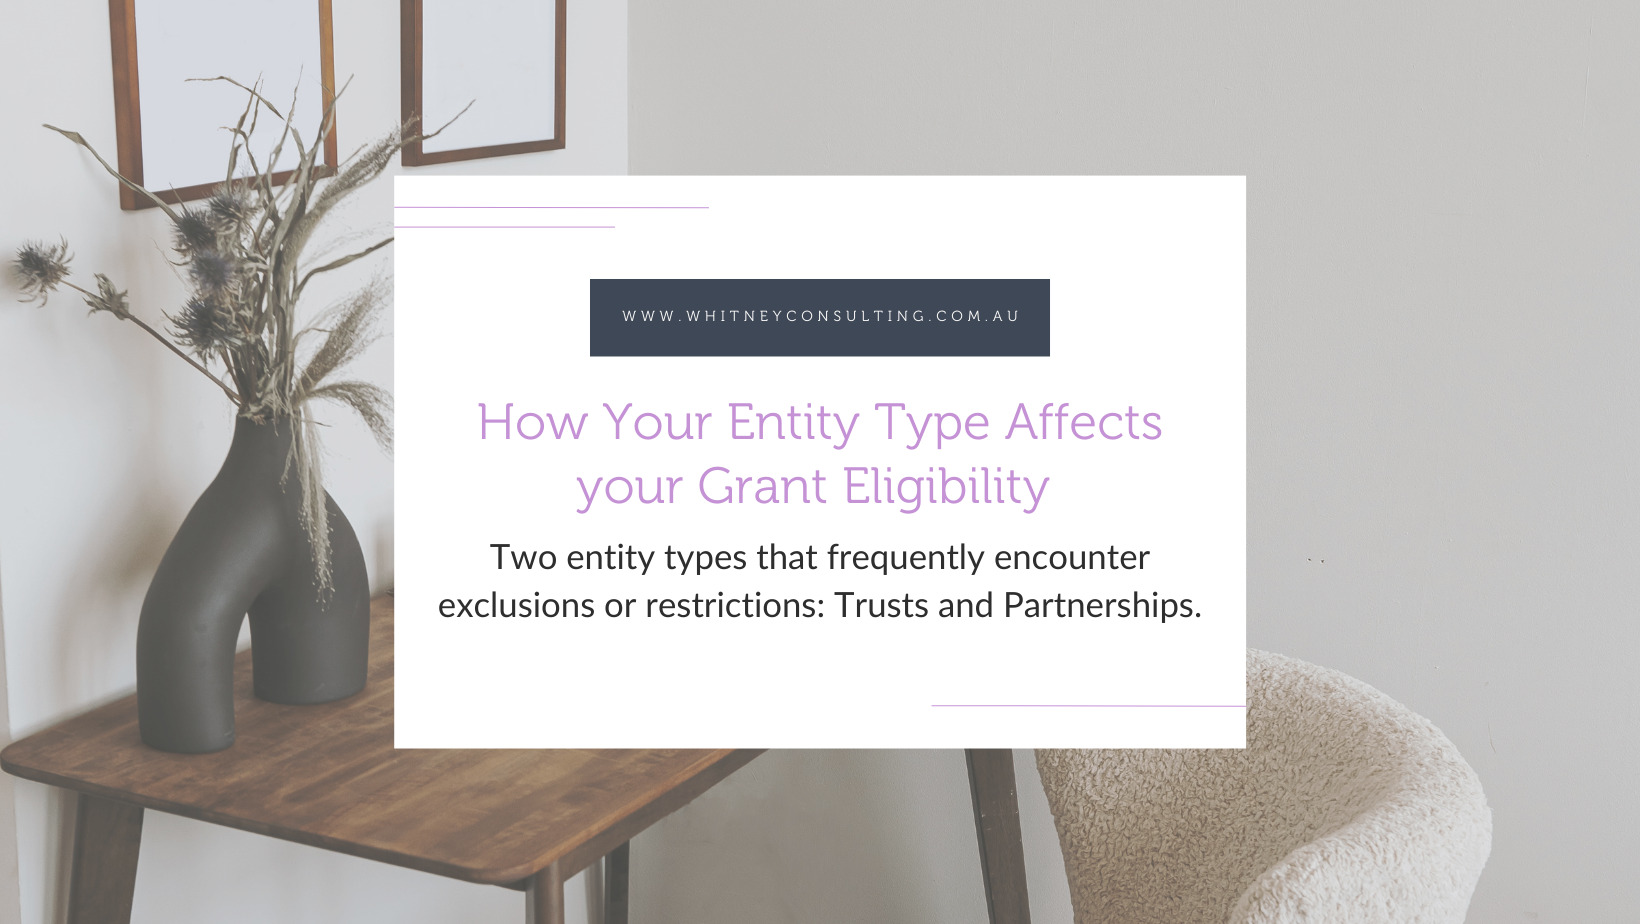 How Your Entity Type Affects your Grant Eligibility